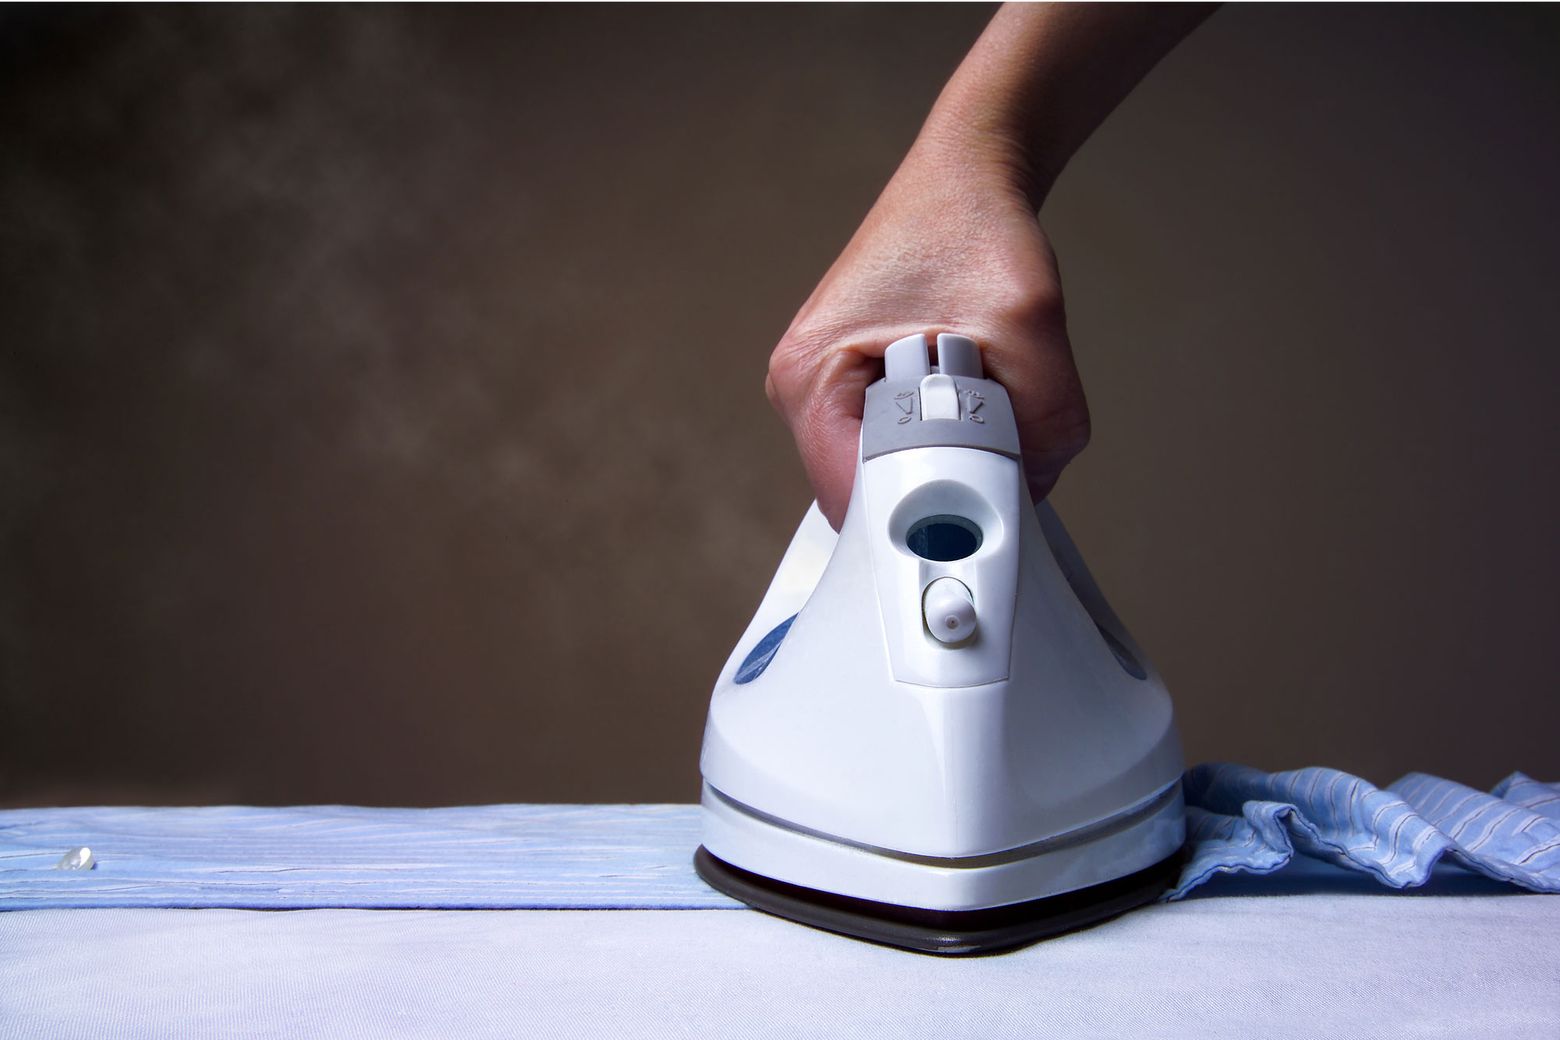 How to Iron Clothes